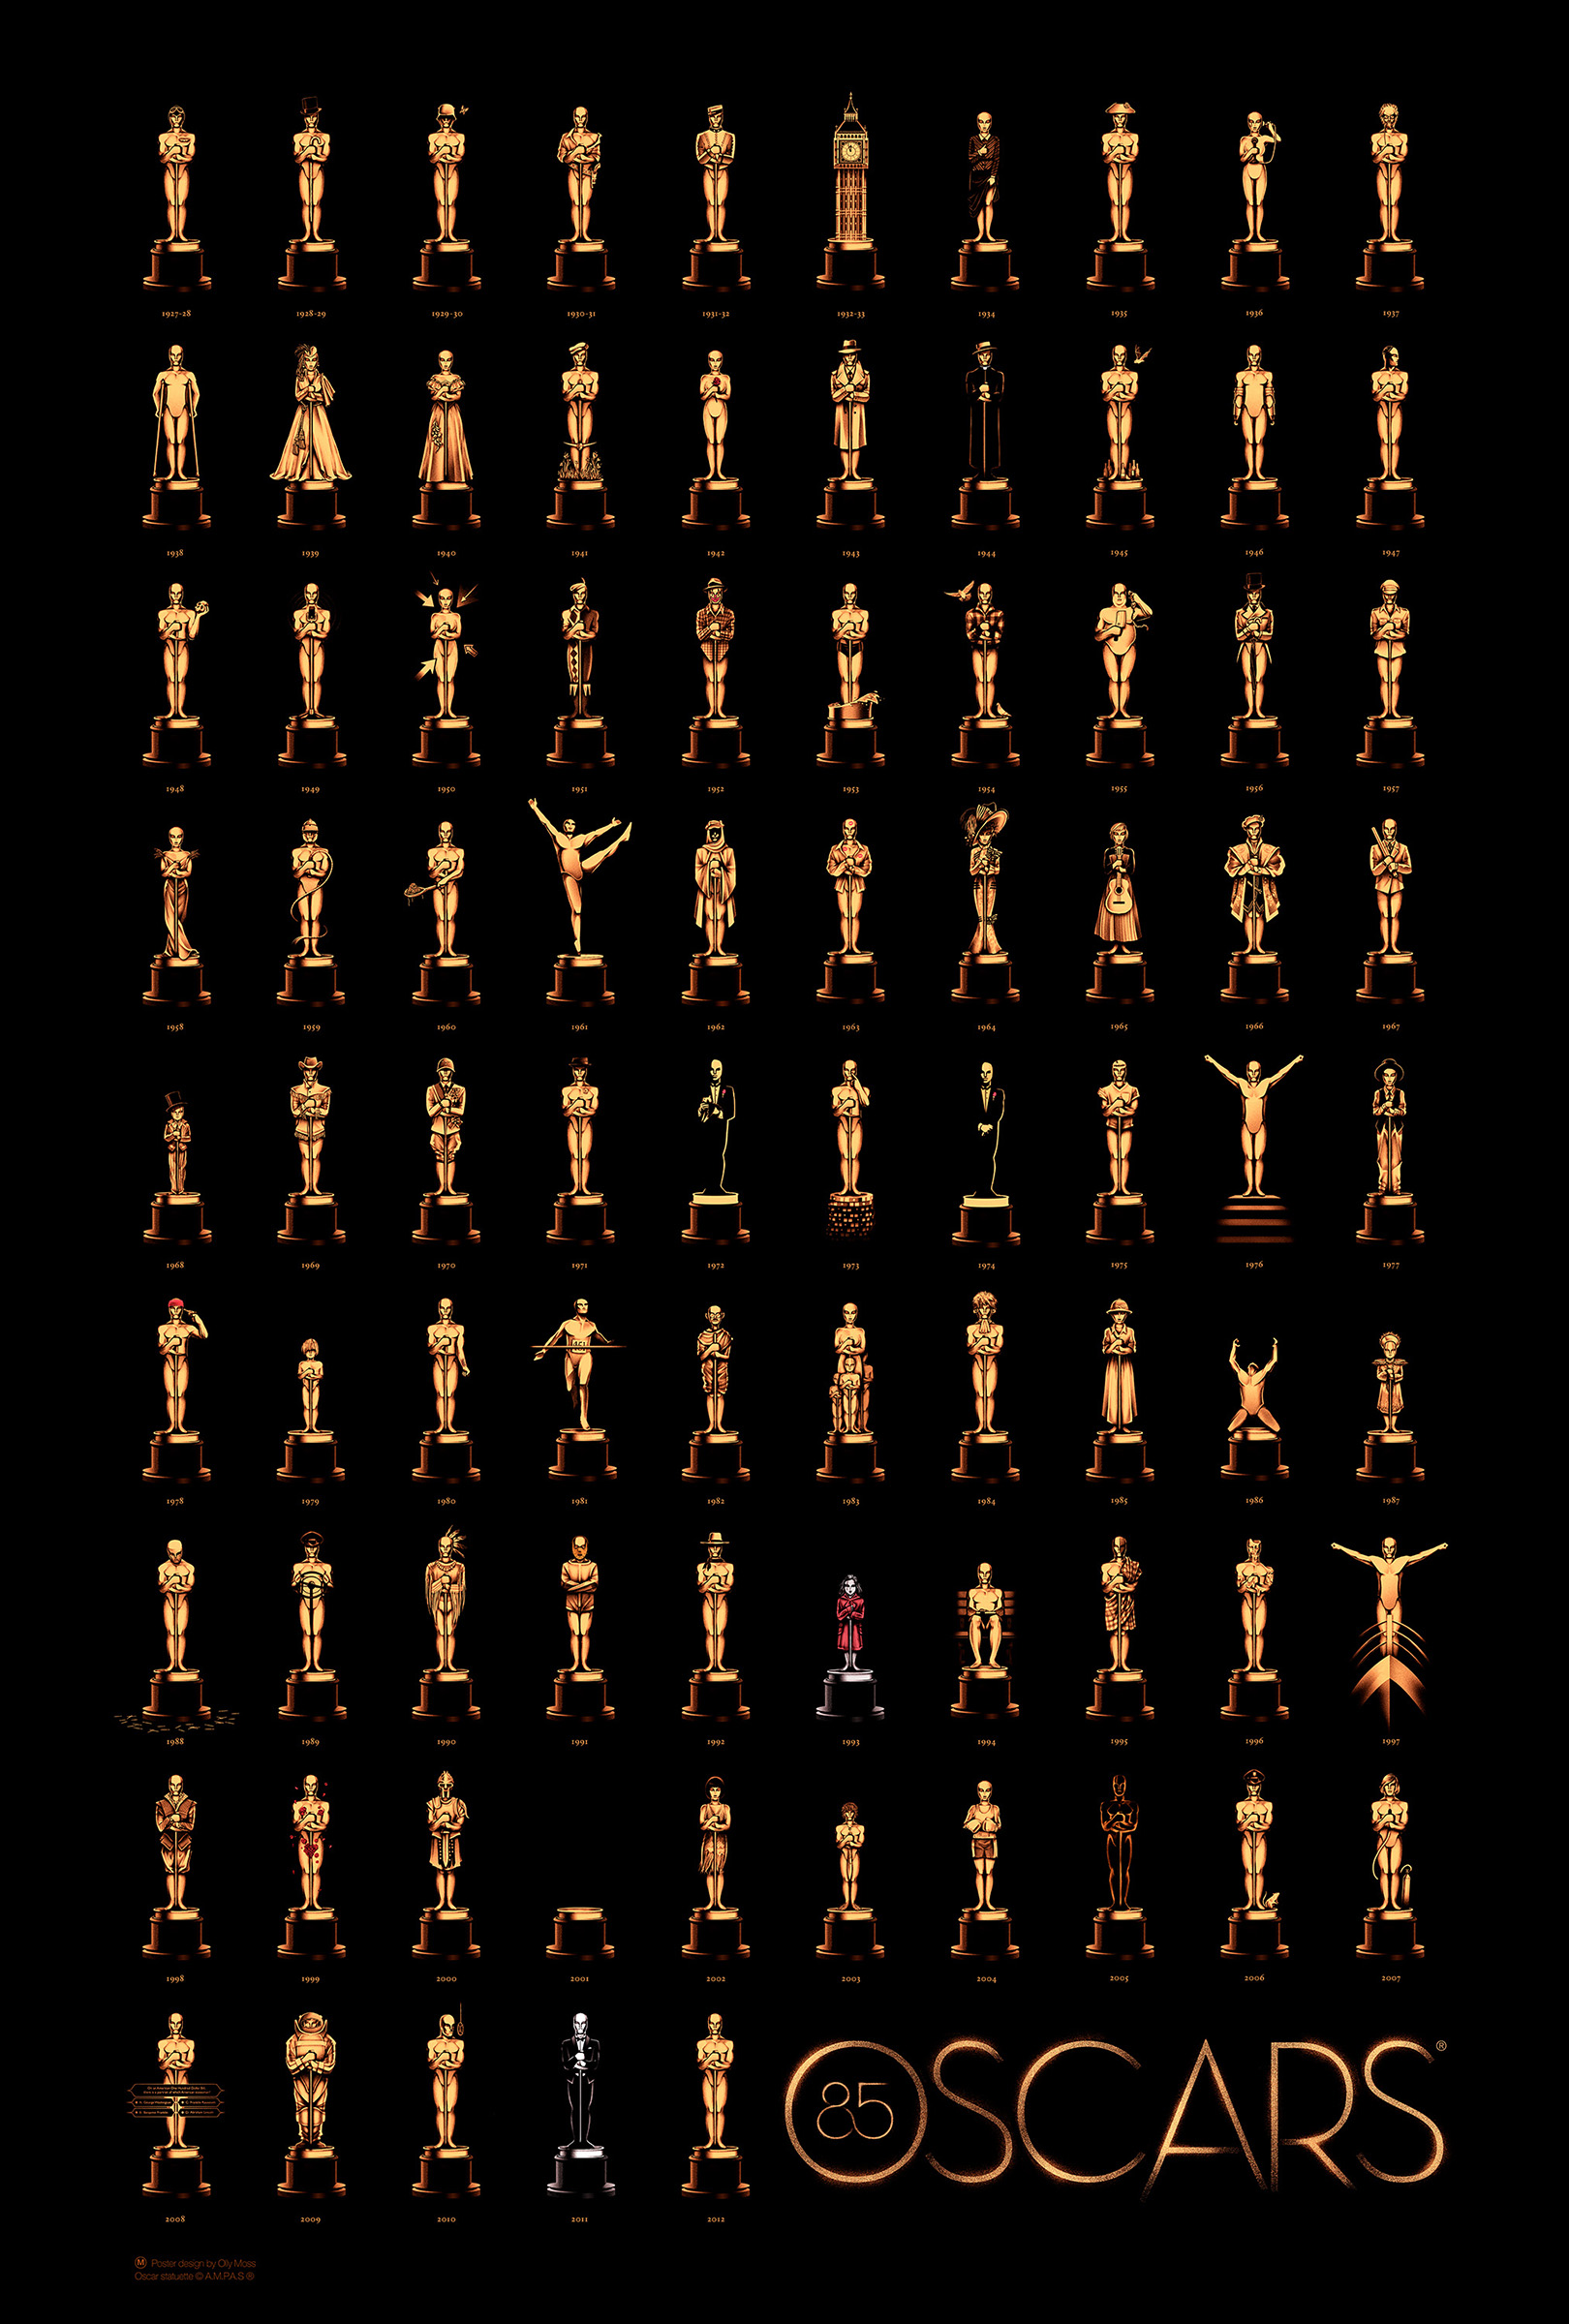 Oscar poster commemorates 85 years of Best Pictures